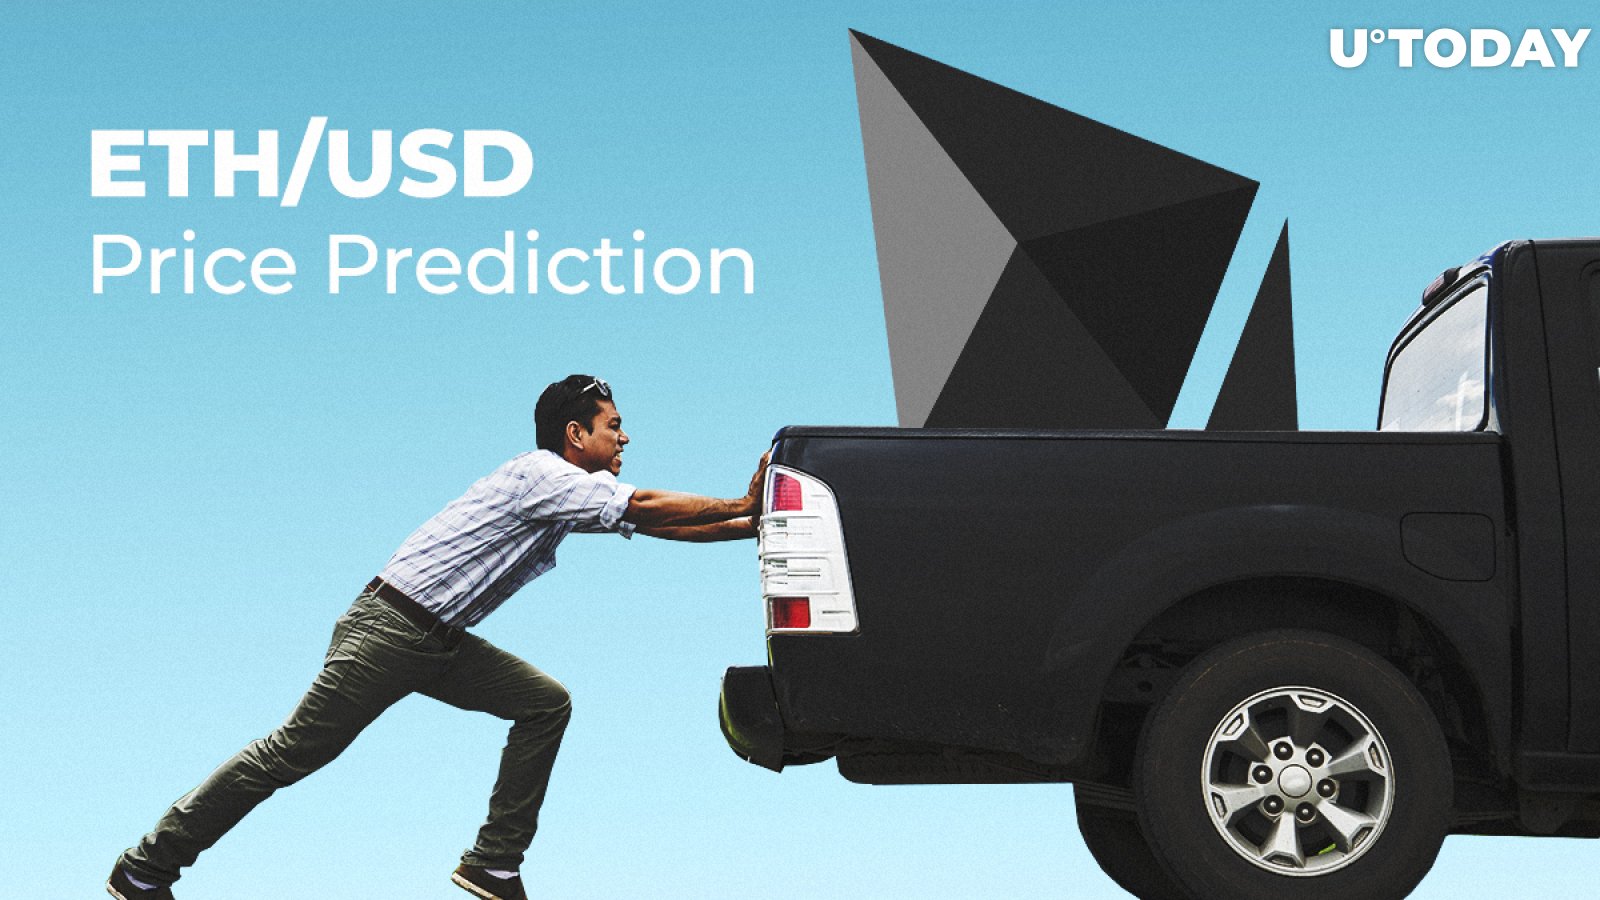 ETH/USD Price Prediction — Can the News Background Push the Price to $150?